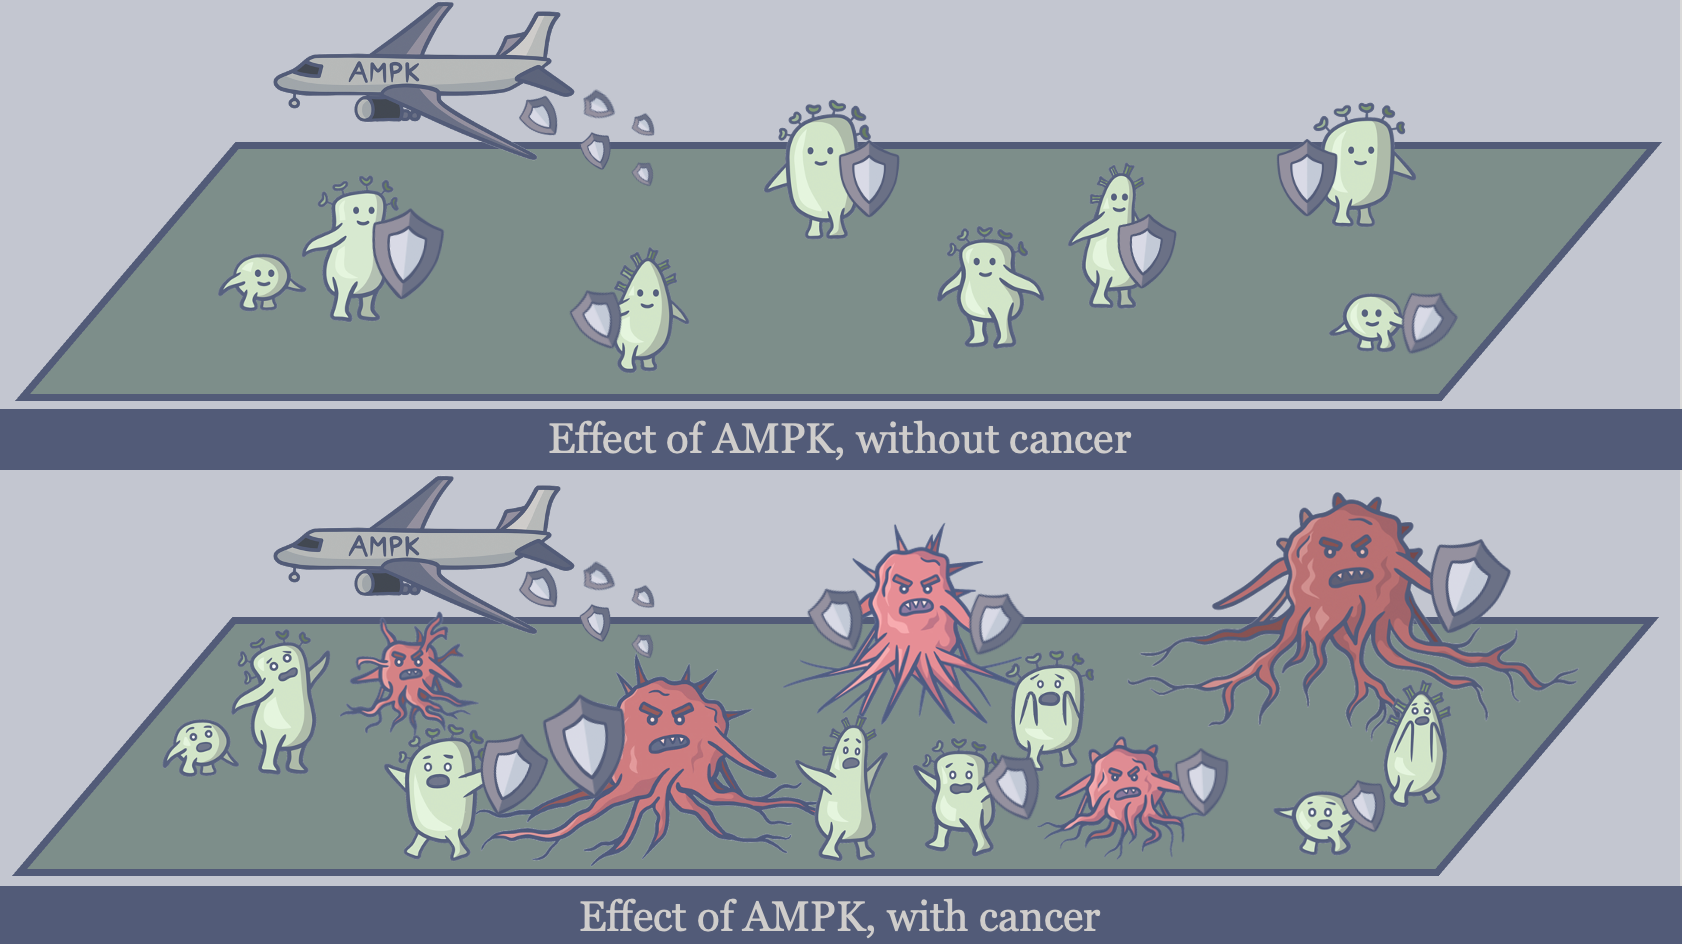 AMPK and cancer